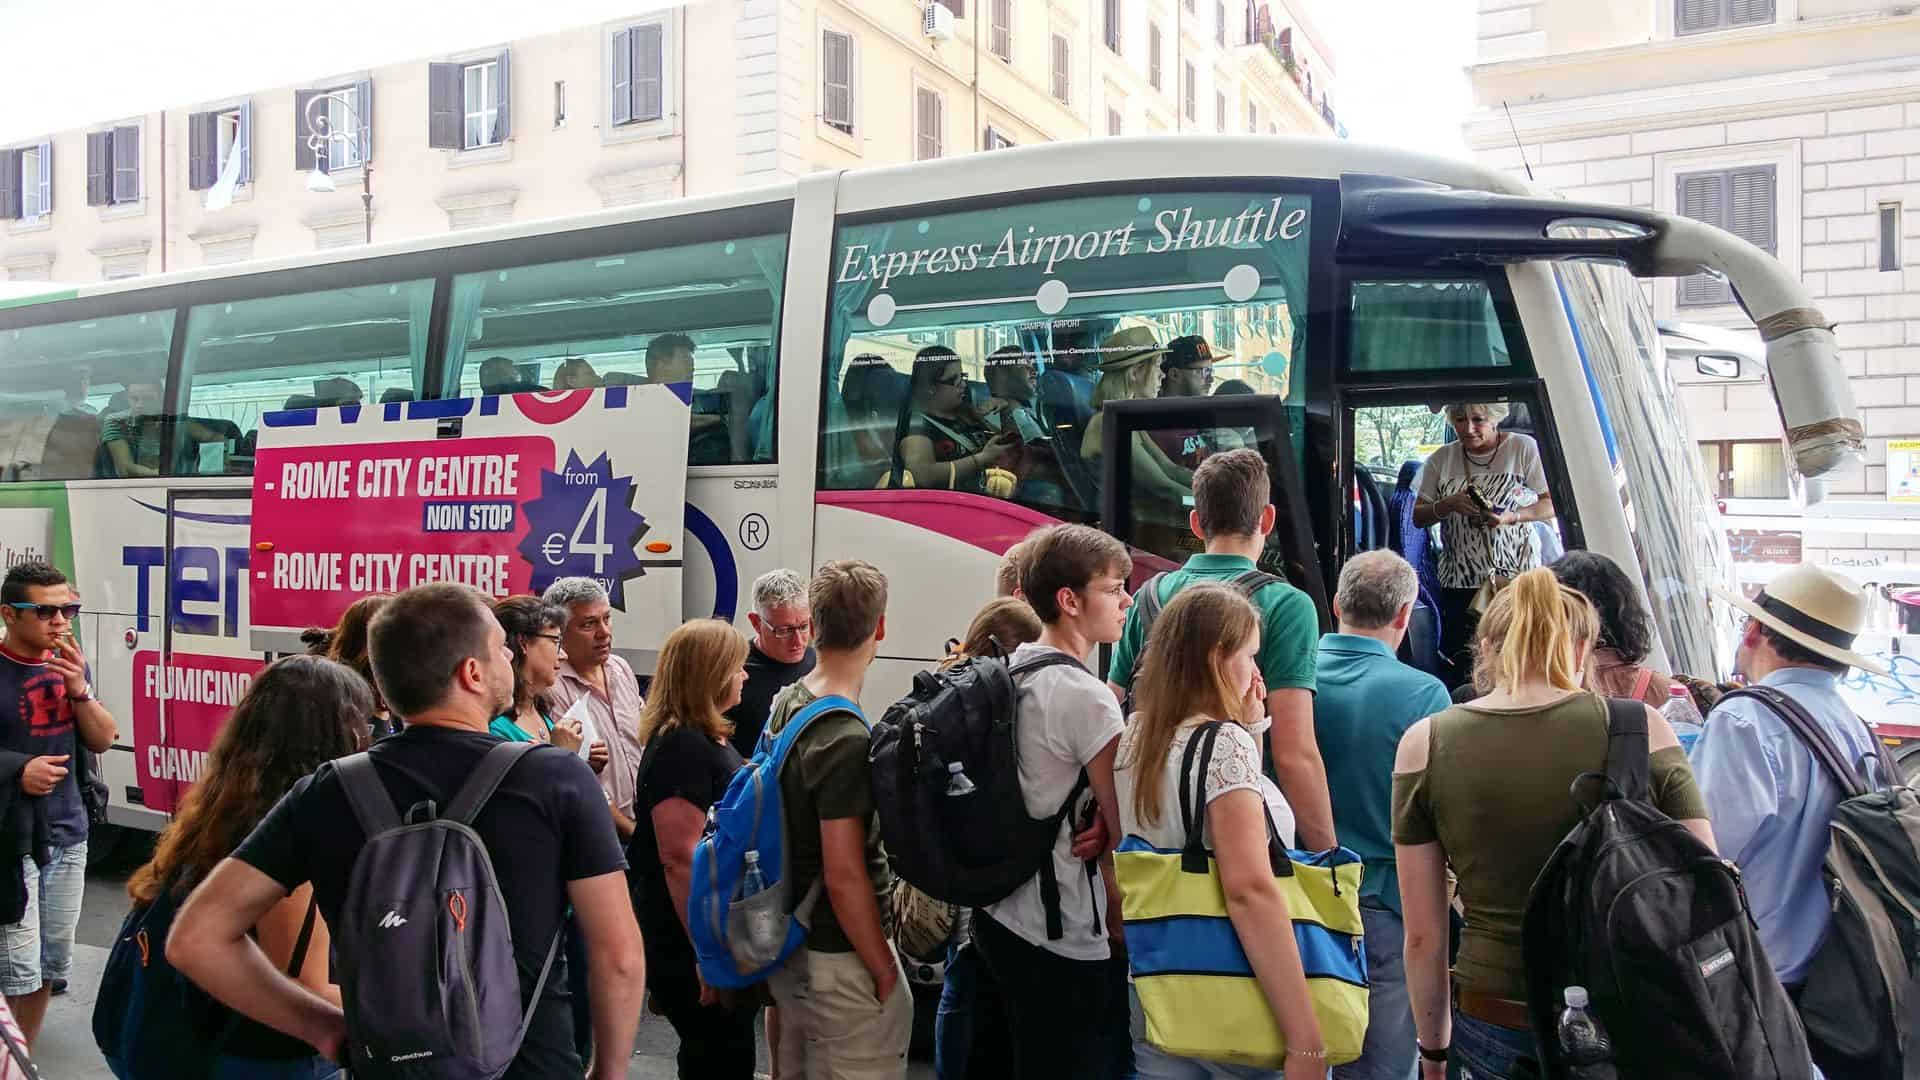 A group of people wait to board an airport shuttle bus.